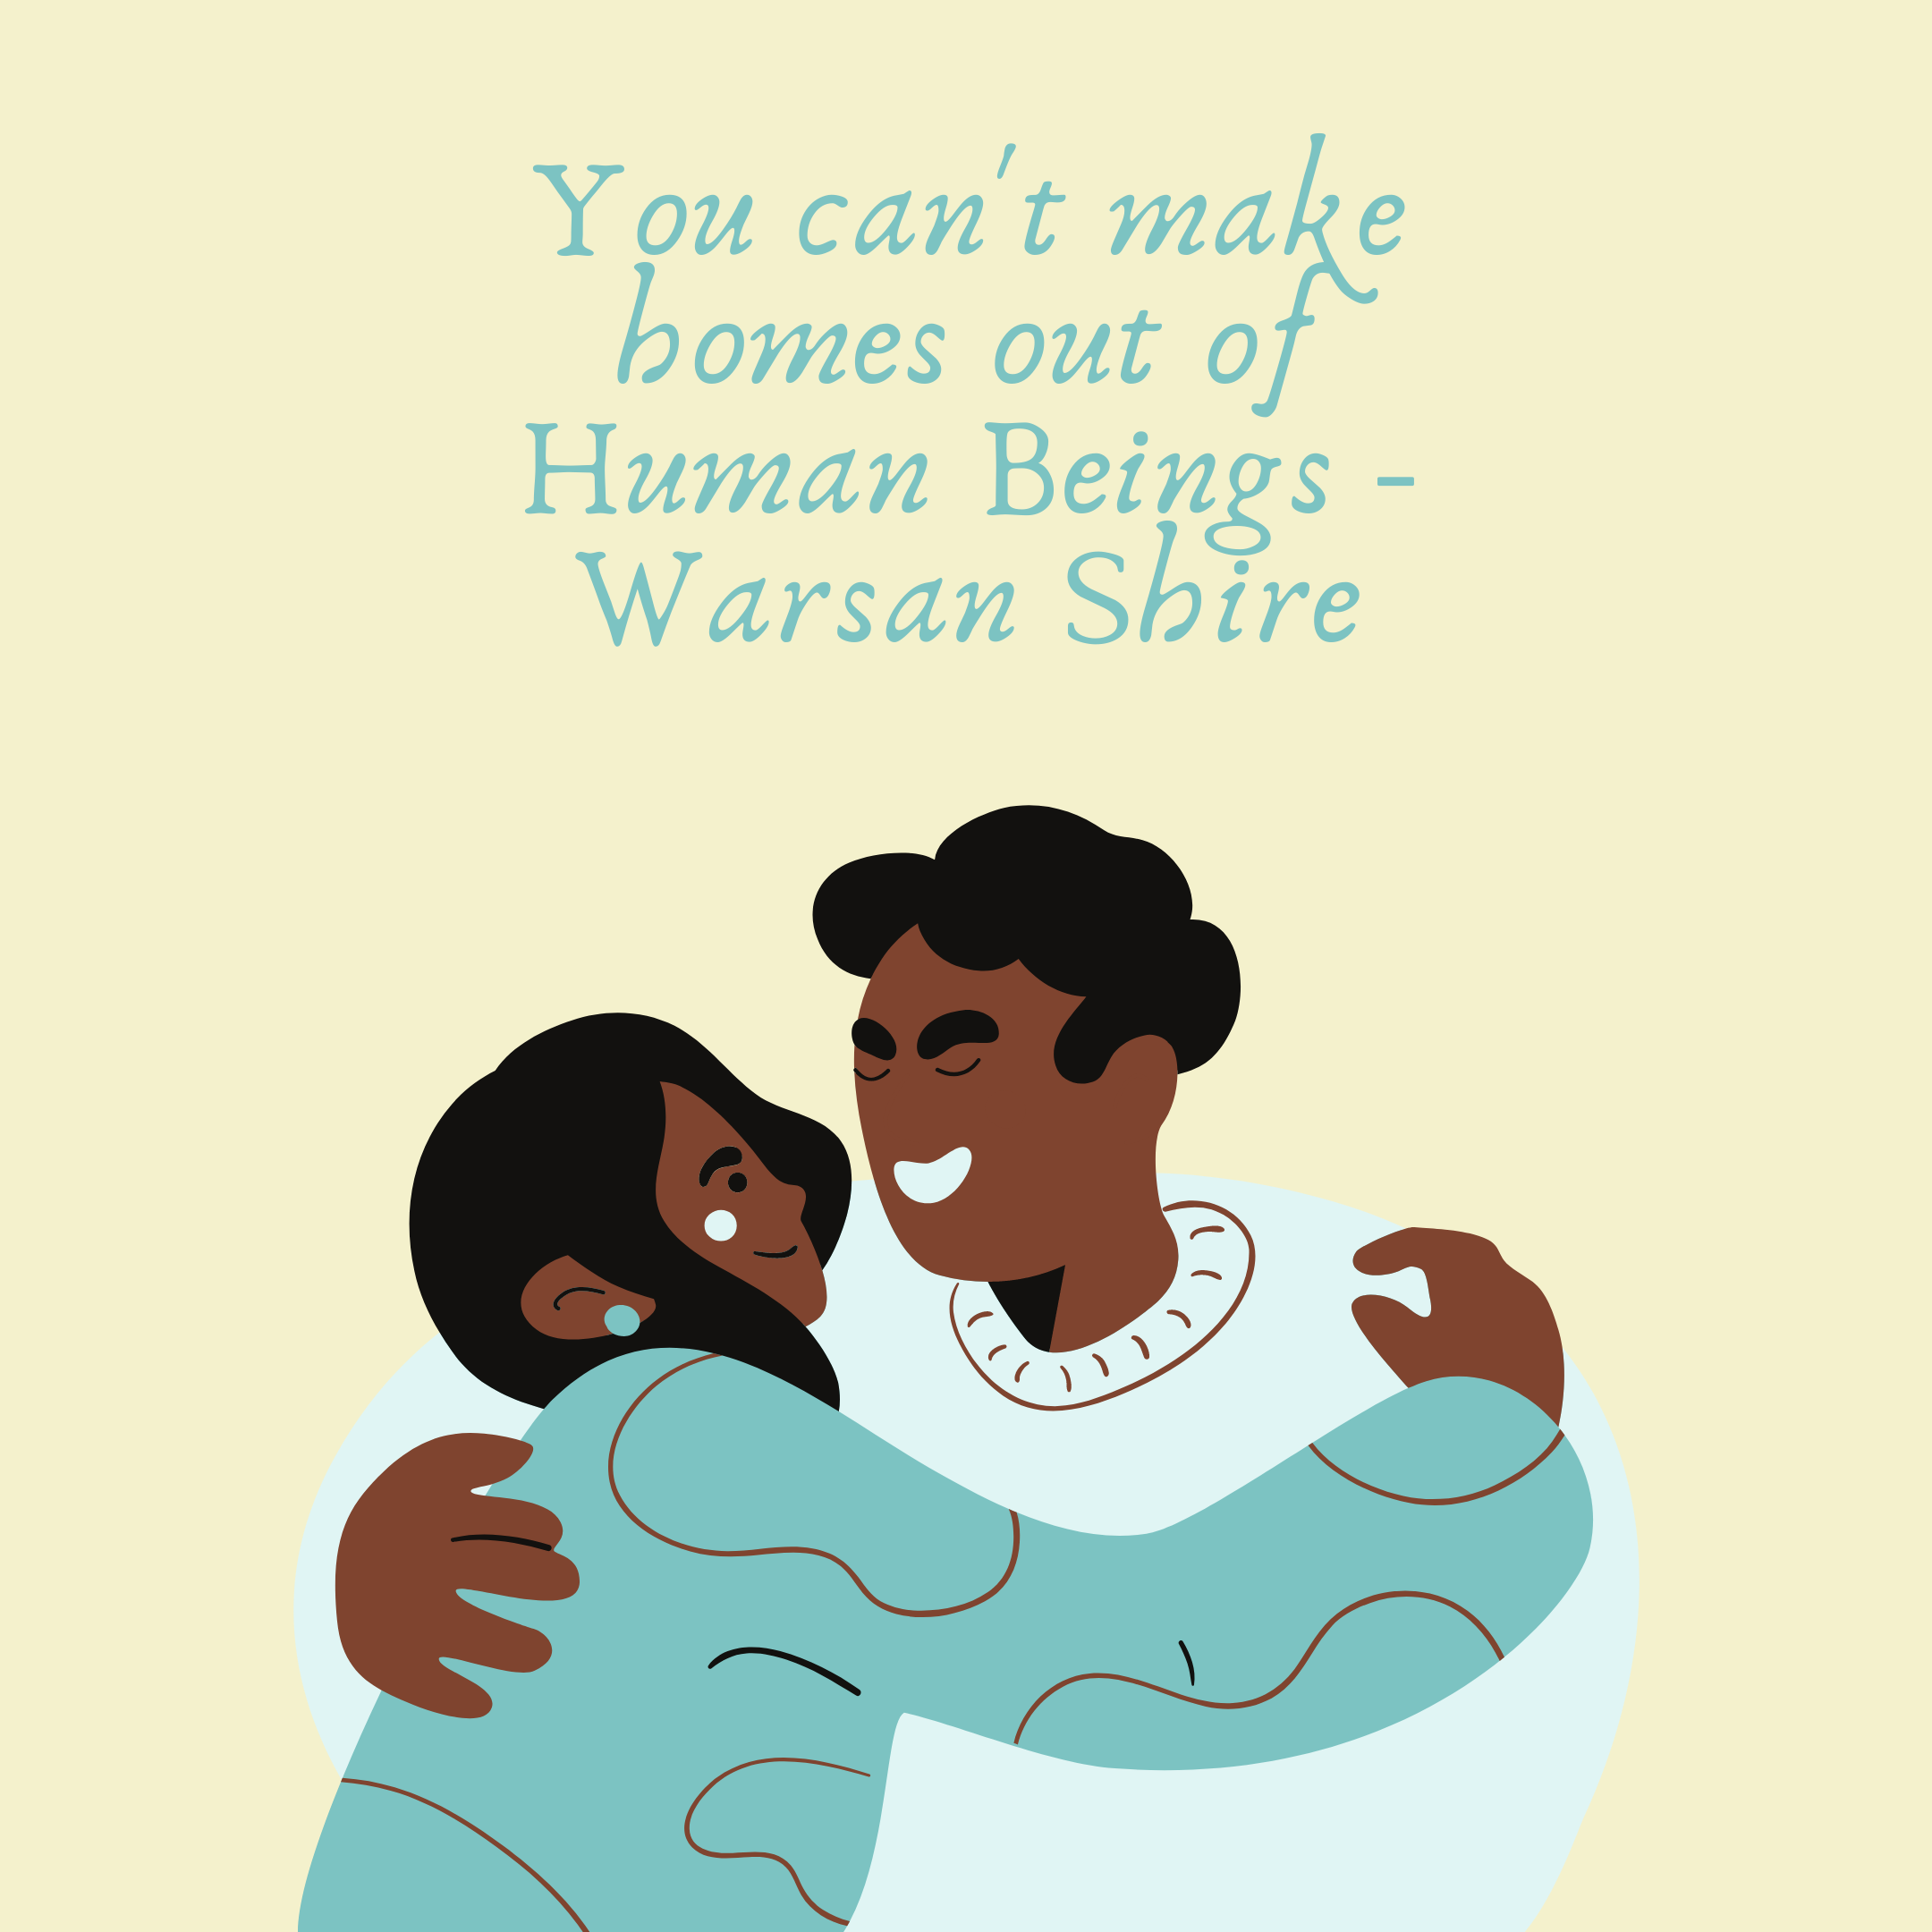 “You can’t make homes out of human beings,” a quote from Warsan Shire’s poem For Women who are ‘Difficult’ to Love. Image by Timia Cobb.